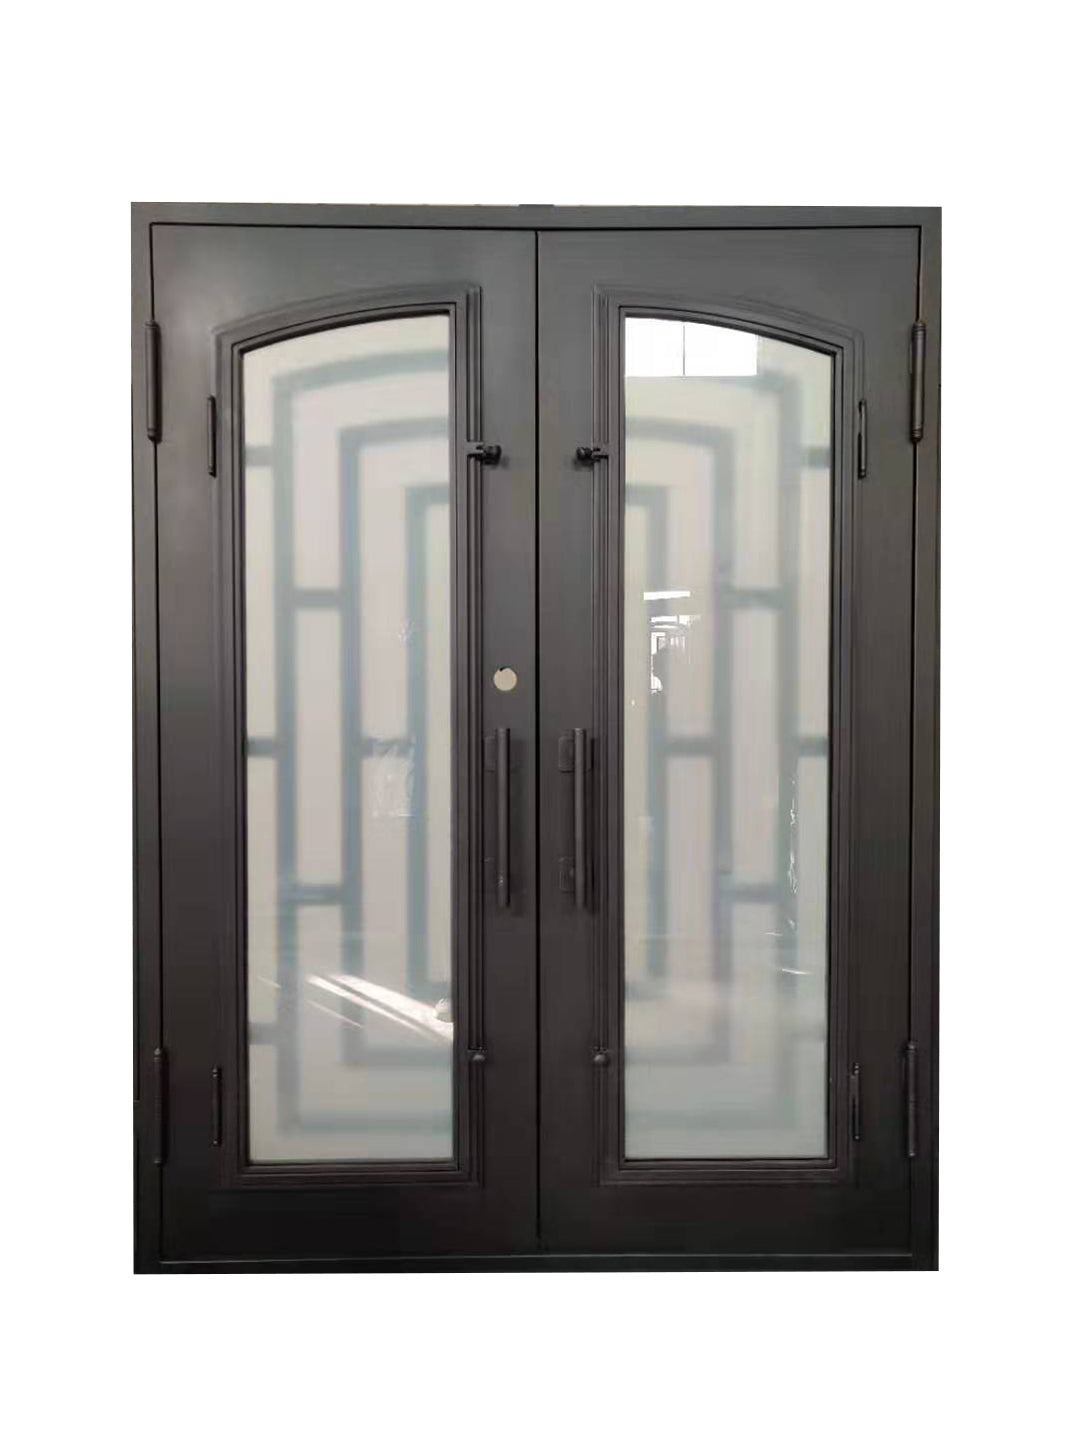 Belton Model Double Front Entry Iron Door With Tempered Frosted Glass Dark Bronze Finish - AAWAIZ IMPORTS